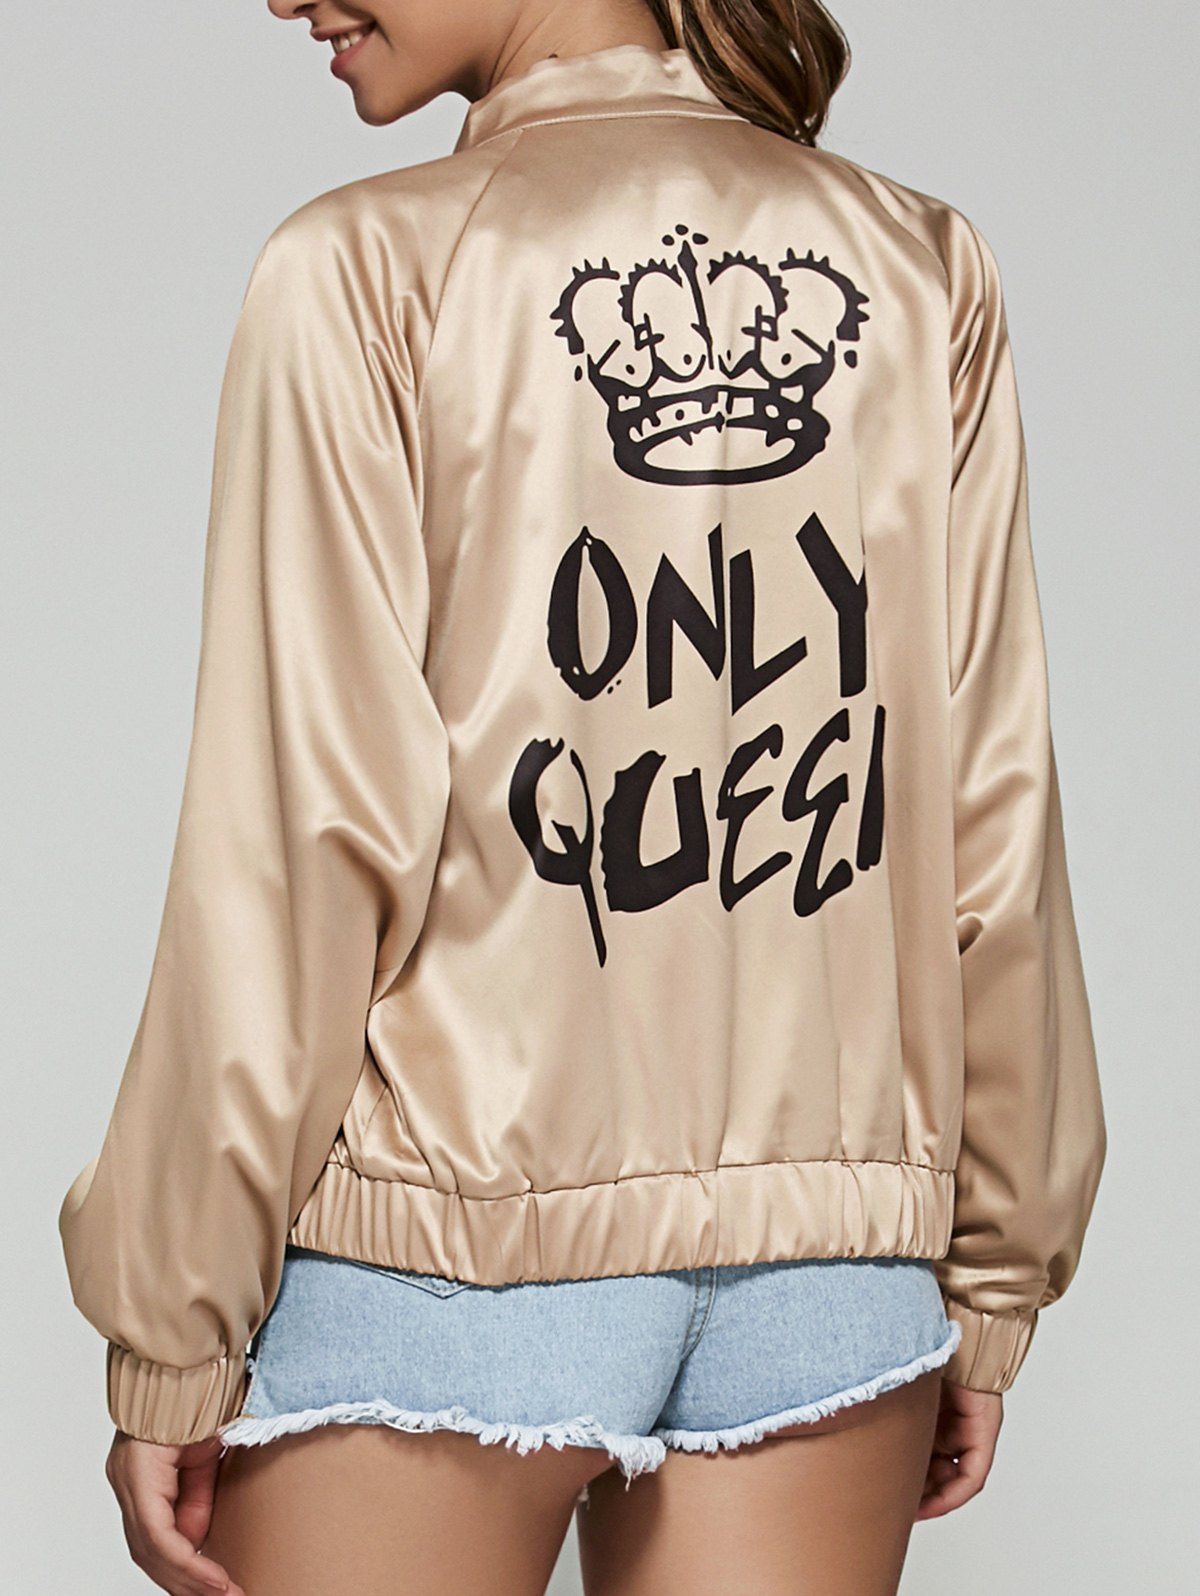 Only Queen Satin Bomber Jacket - CHAMPAGNE L